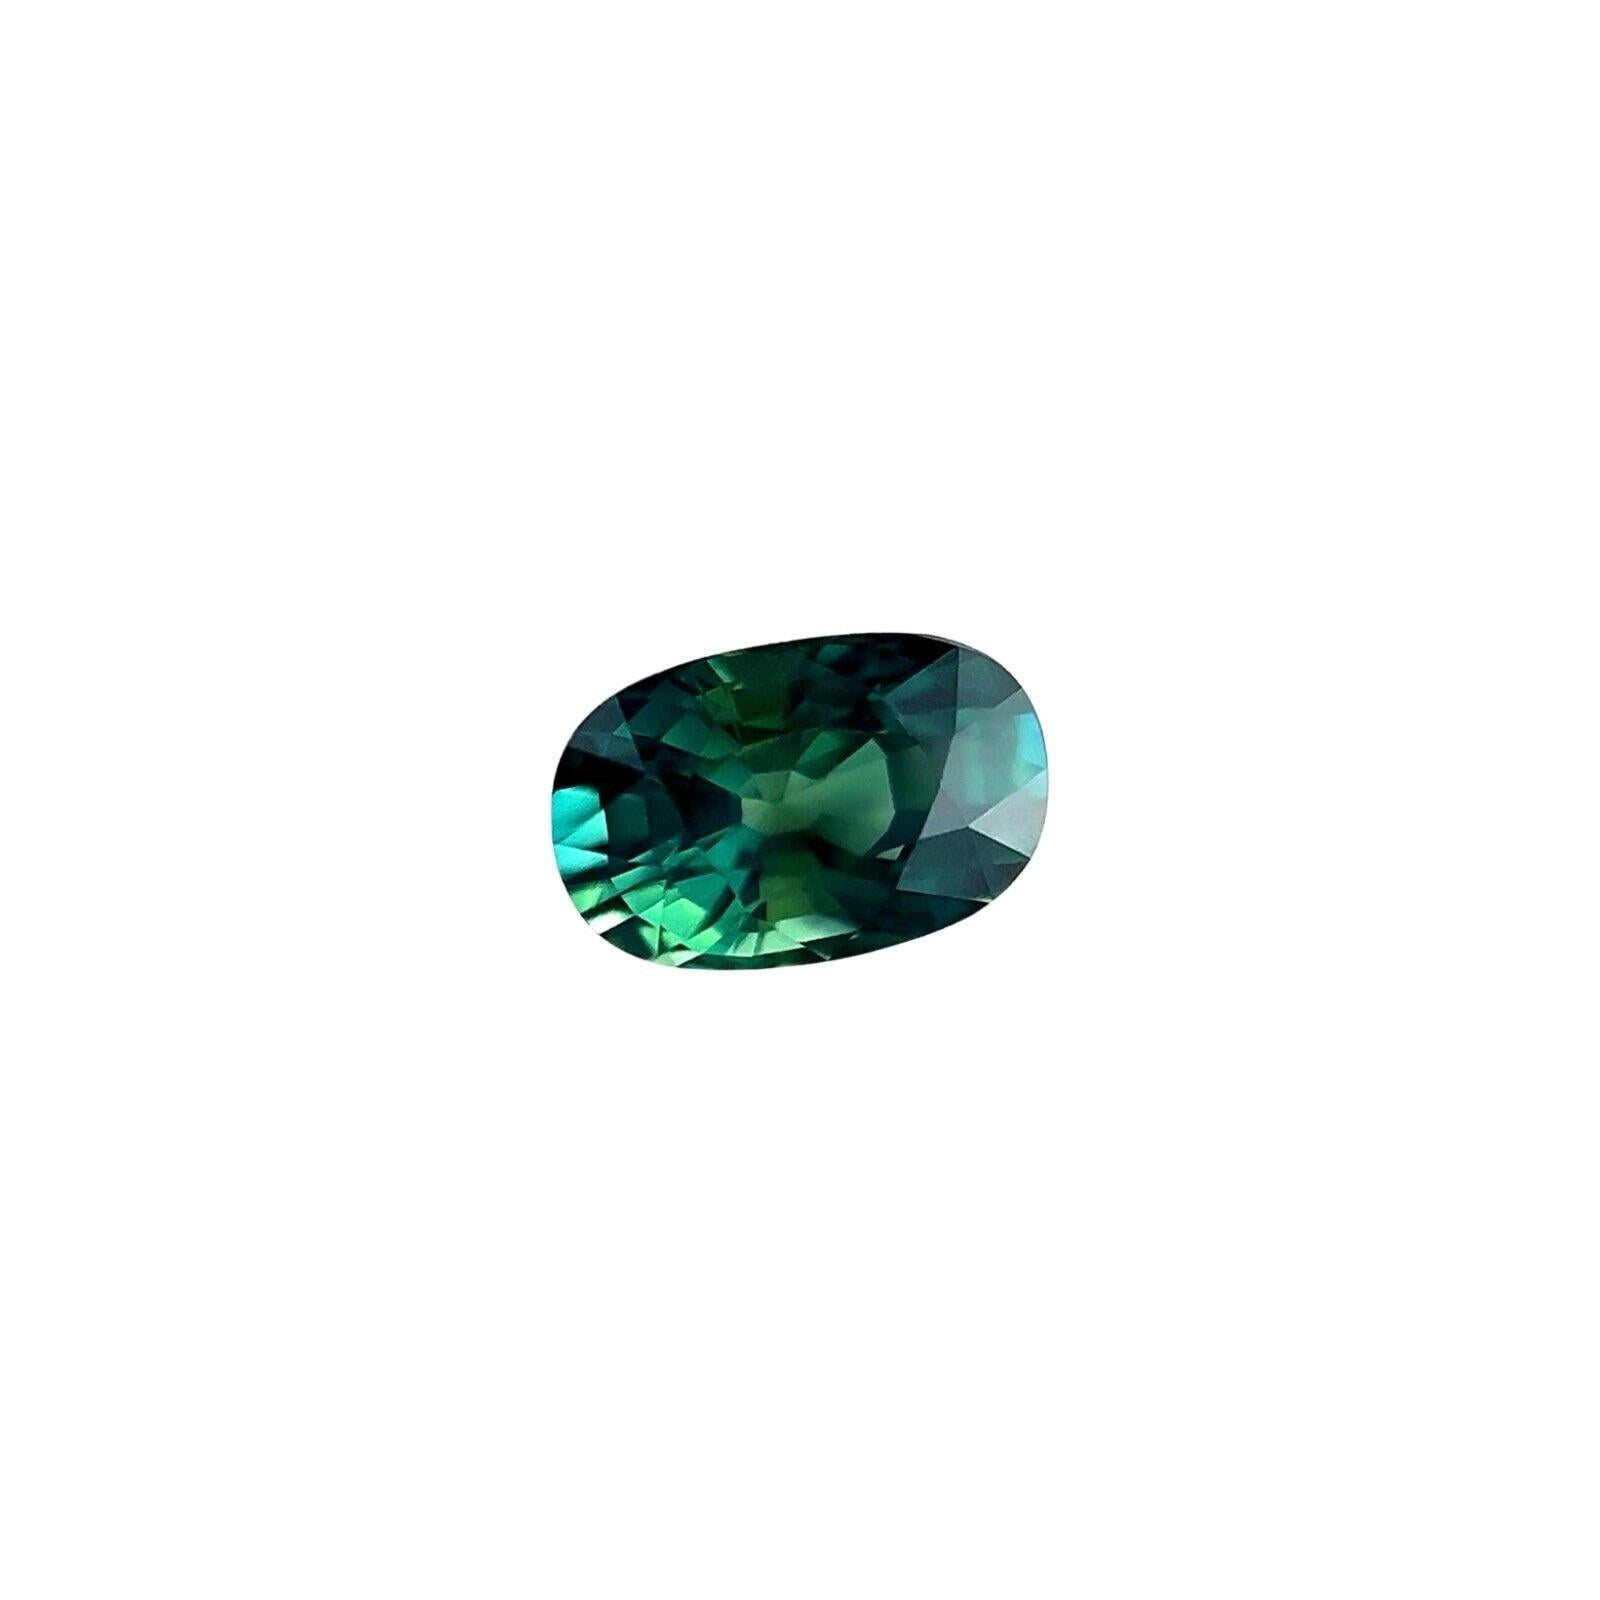 GIA Certified 1.03Ct Sapphire Natural Vivid Green Blue Untreated 6.8X4.3Mm IF

Natural Untreated Green Blue Colour Sapphire Gemstone.
1.03 Carat unheated sapphire with a beautiful deep green blue colour.
Fully certified by GIA confirming stone as